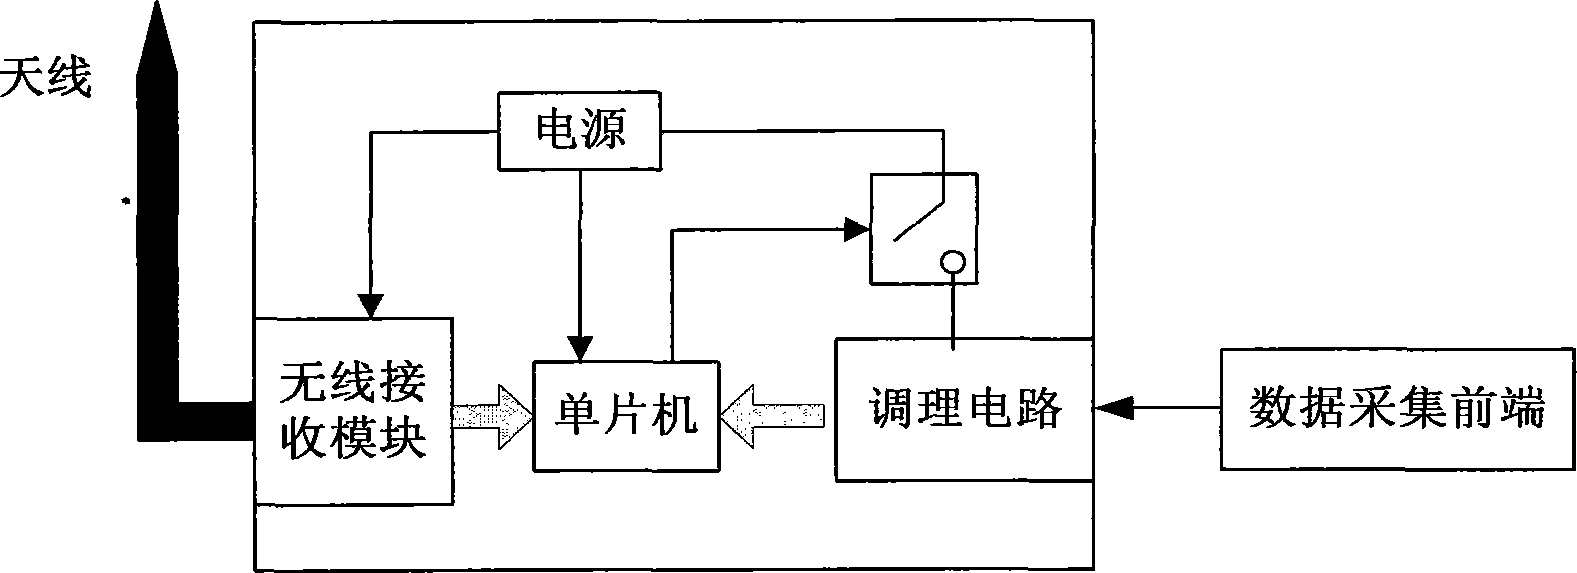 Low-power-consumption power supply system for wireless sensor network